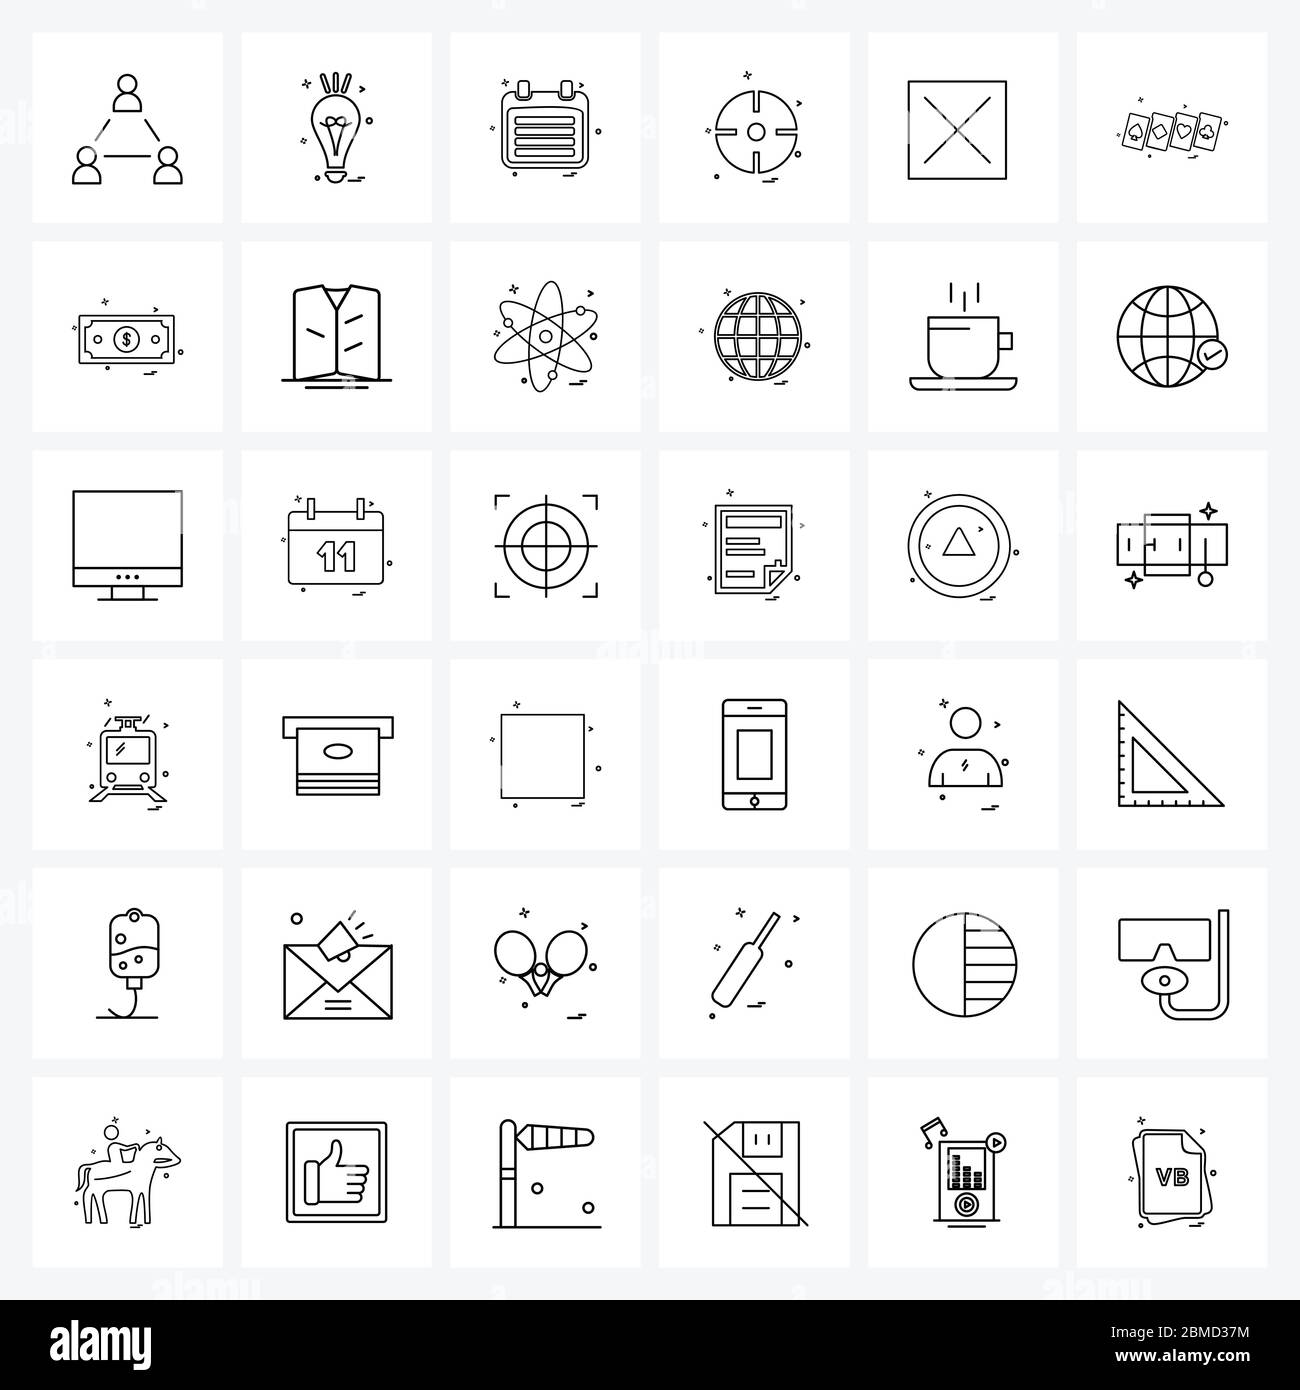 Mobile UI Line Icon Set of 36 Modern Pictograms of box, agriculture, education, wind, text Vector Illustration Stock Vector